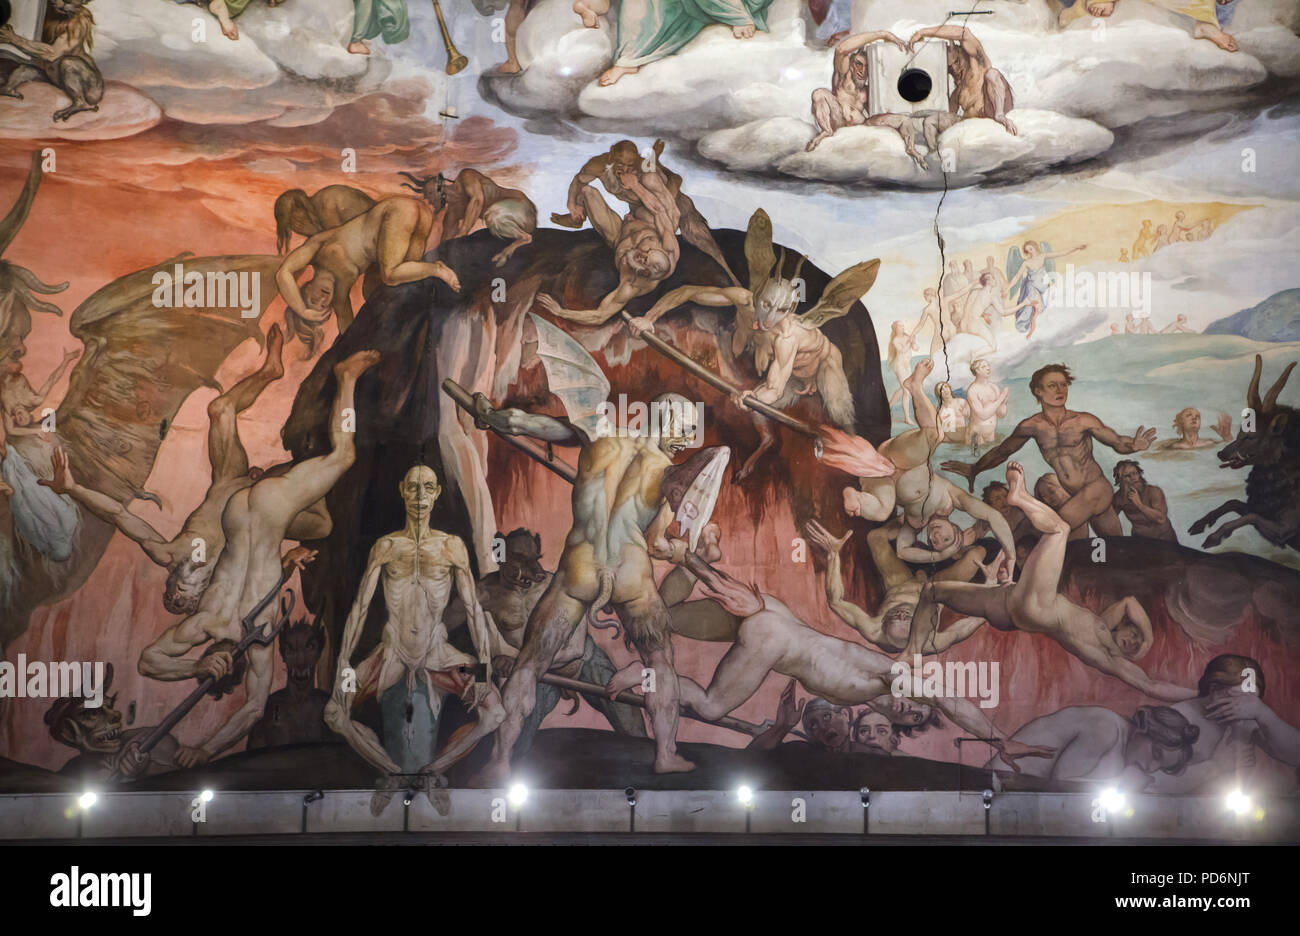 Last Judgment depicted in the fresco by Italian Renaissance painter Giorgio Vasari in the dome of the Florence Cathedral (Duomo di Firenze) in Florence, Tuscany, Italy. The fall of the damned into Hell is depicted in the detail. Stock Photo